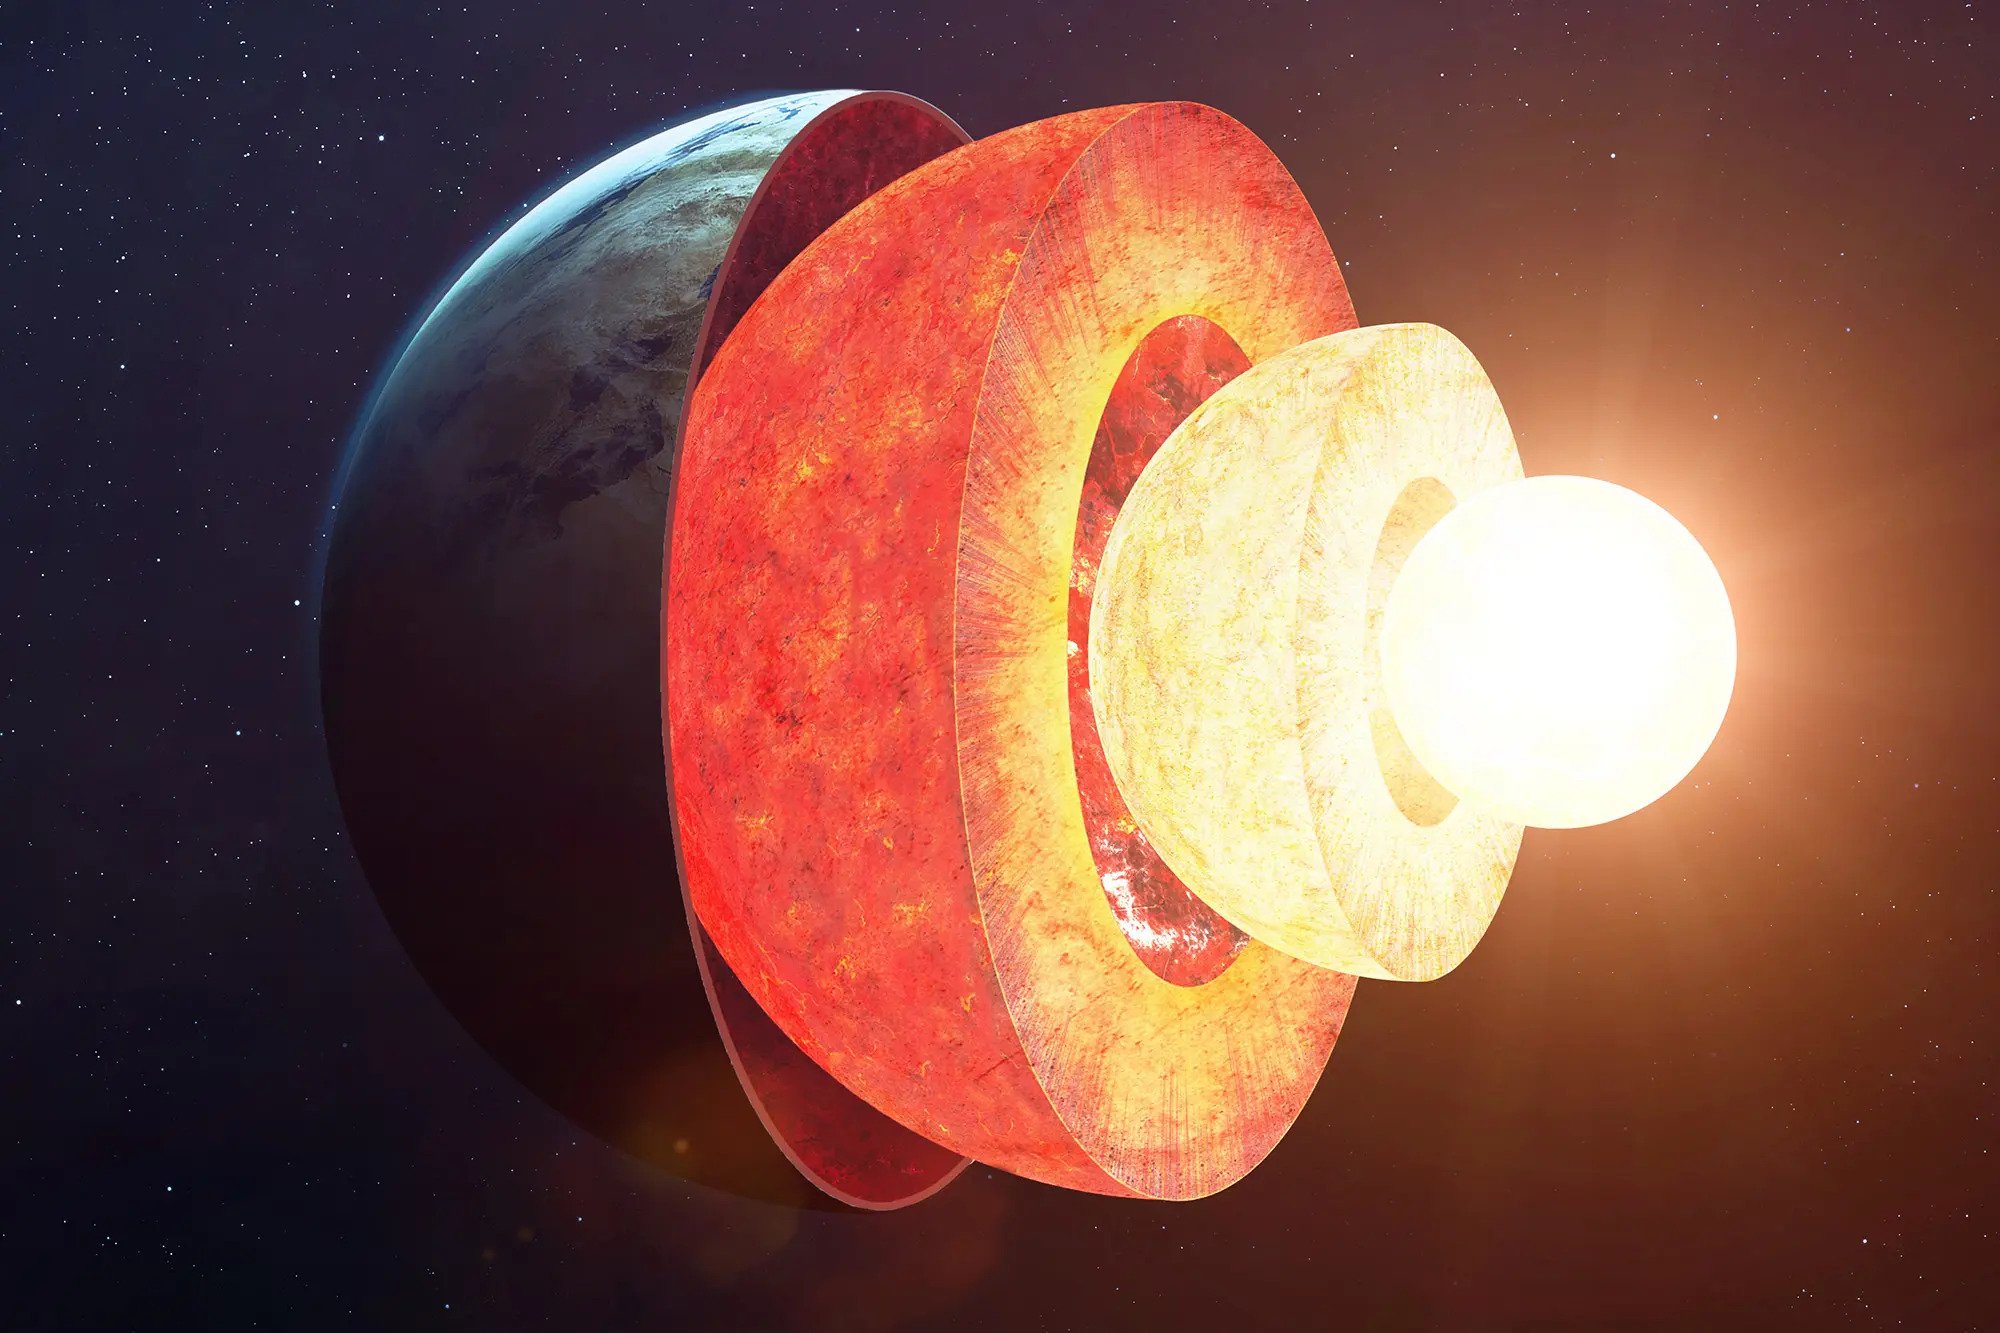 How Has The Earth’s Core Stayed As Hot As The Sun’s Surface For Billions Of Years?